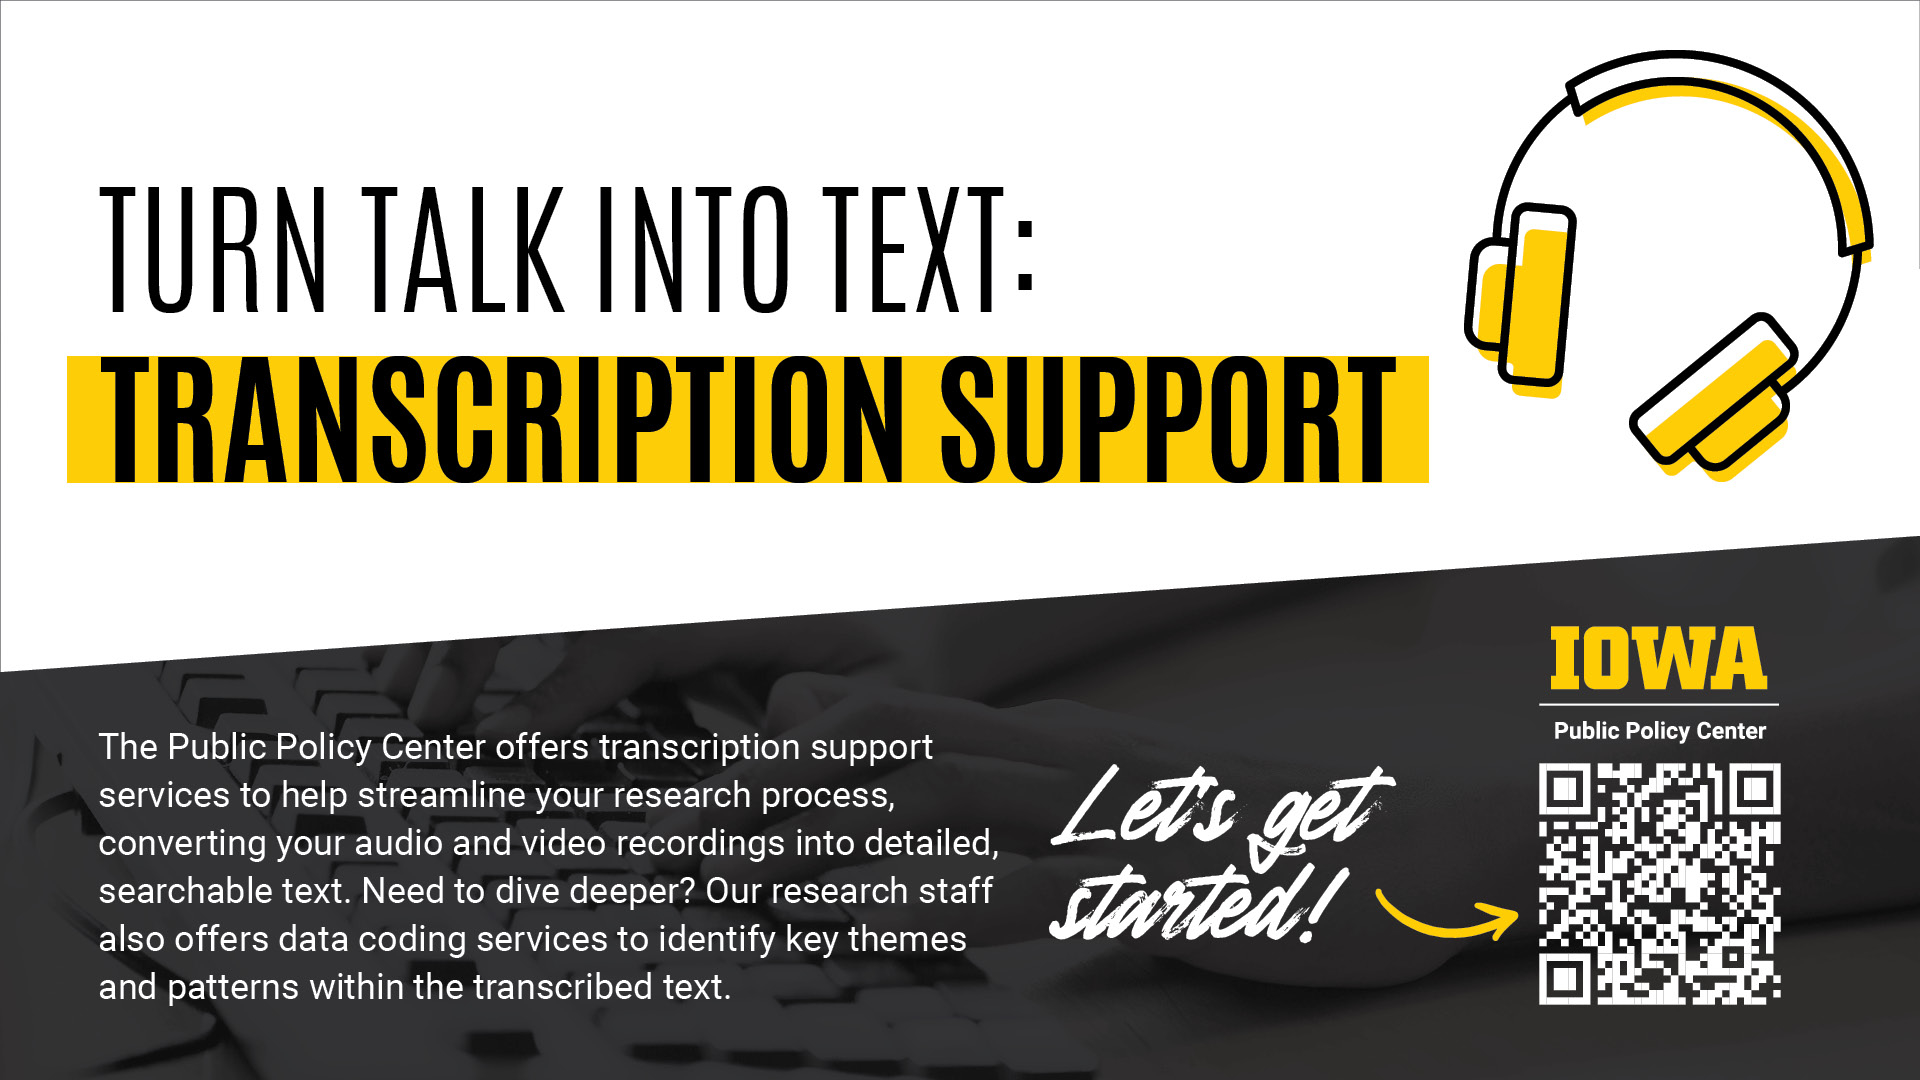 Text that says "Turn Talk Into Text: Transcription Support" next to headphone icon and a description of the PPC's transcription services.